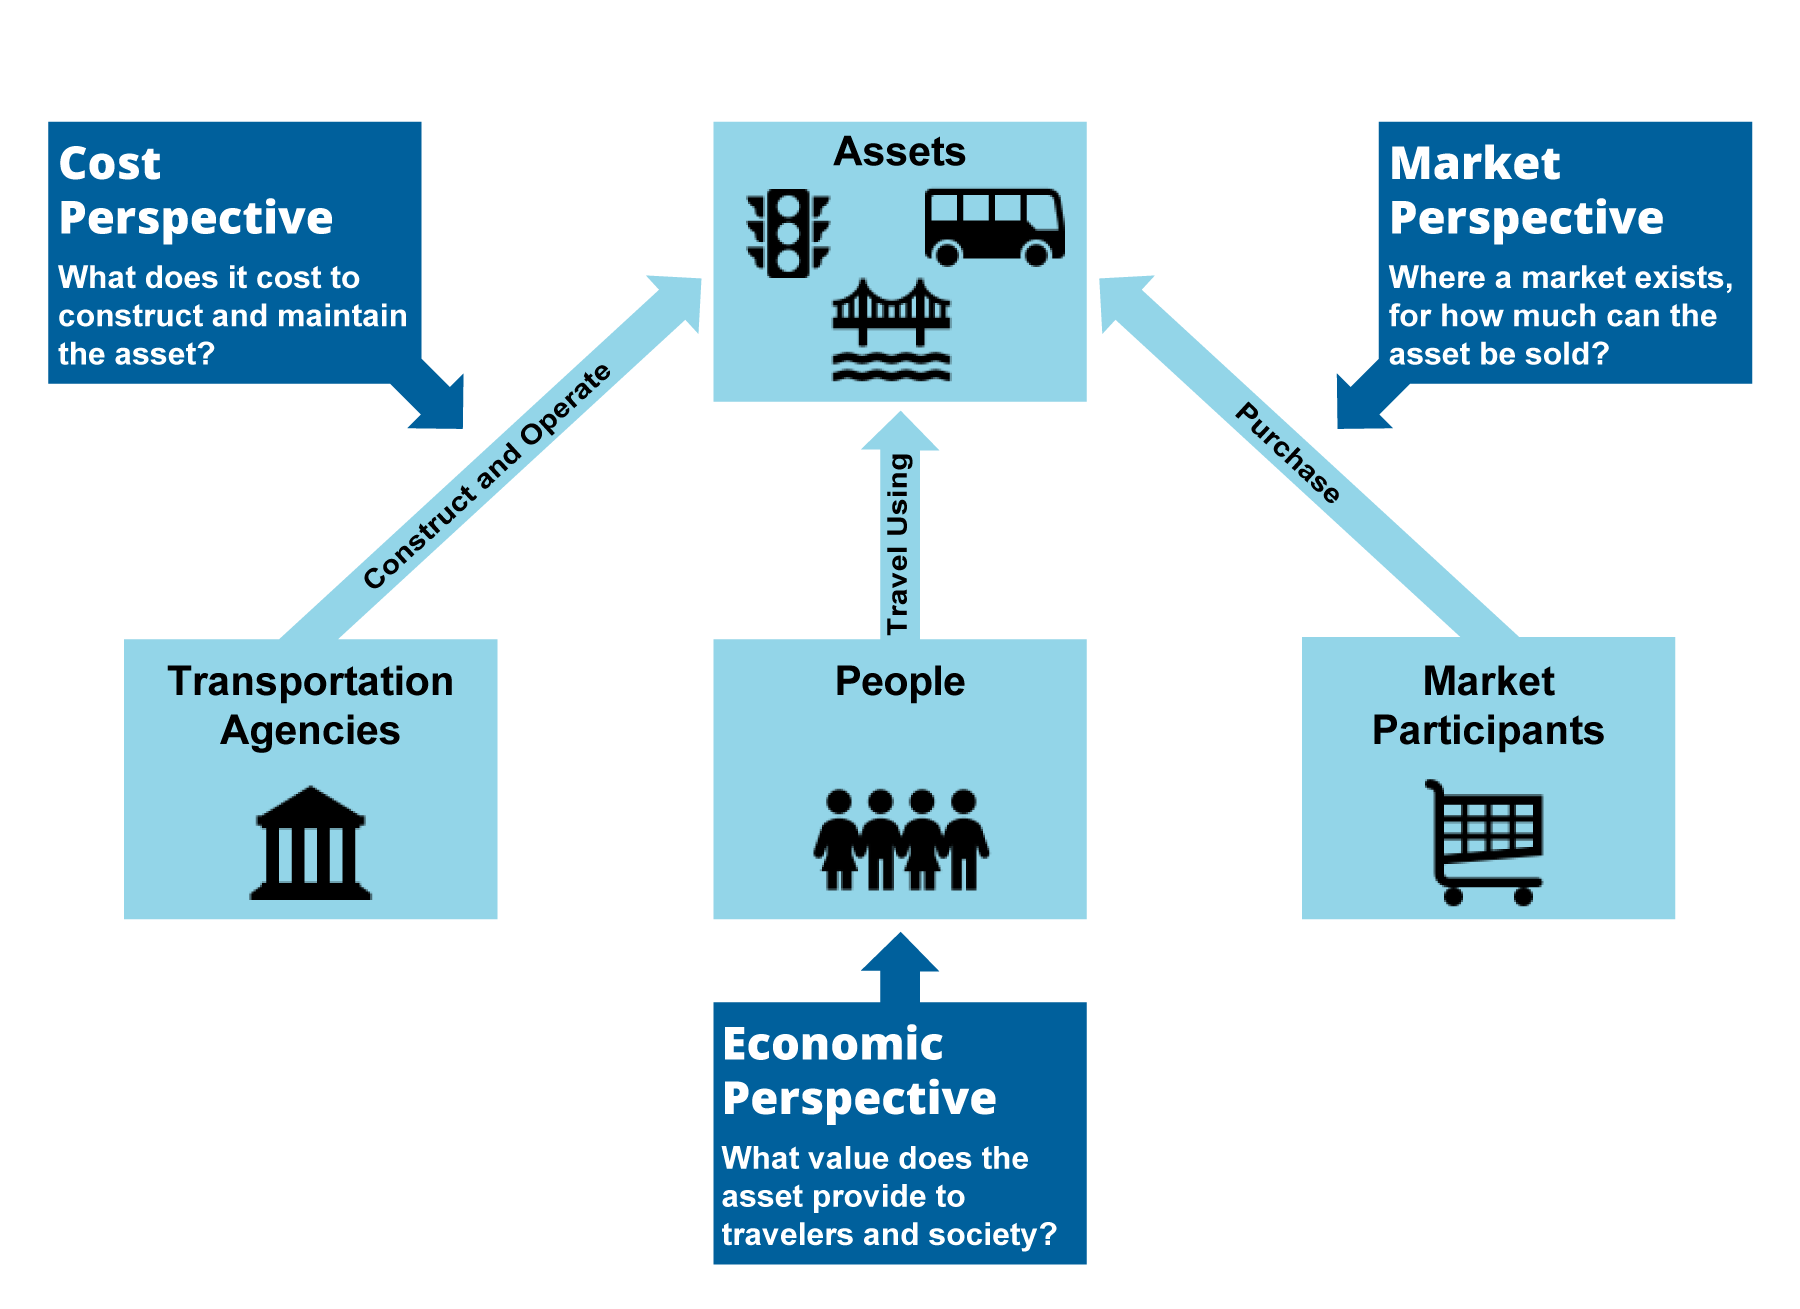 cost, economic, and market perspectives of asset value from transportation agencies, people, and market participants